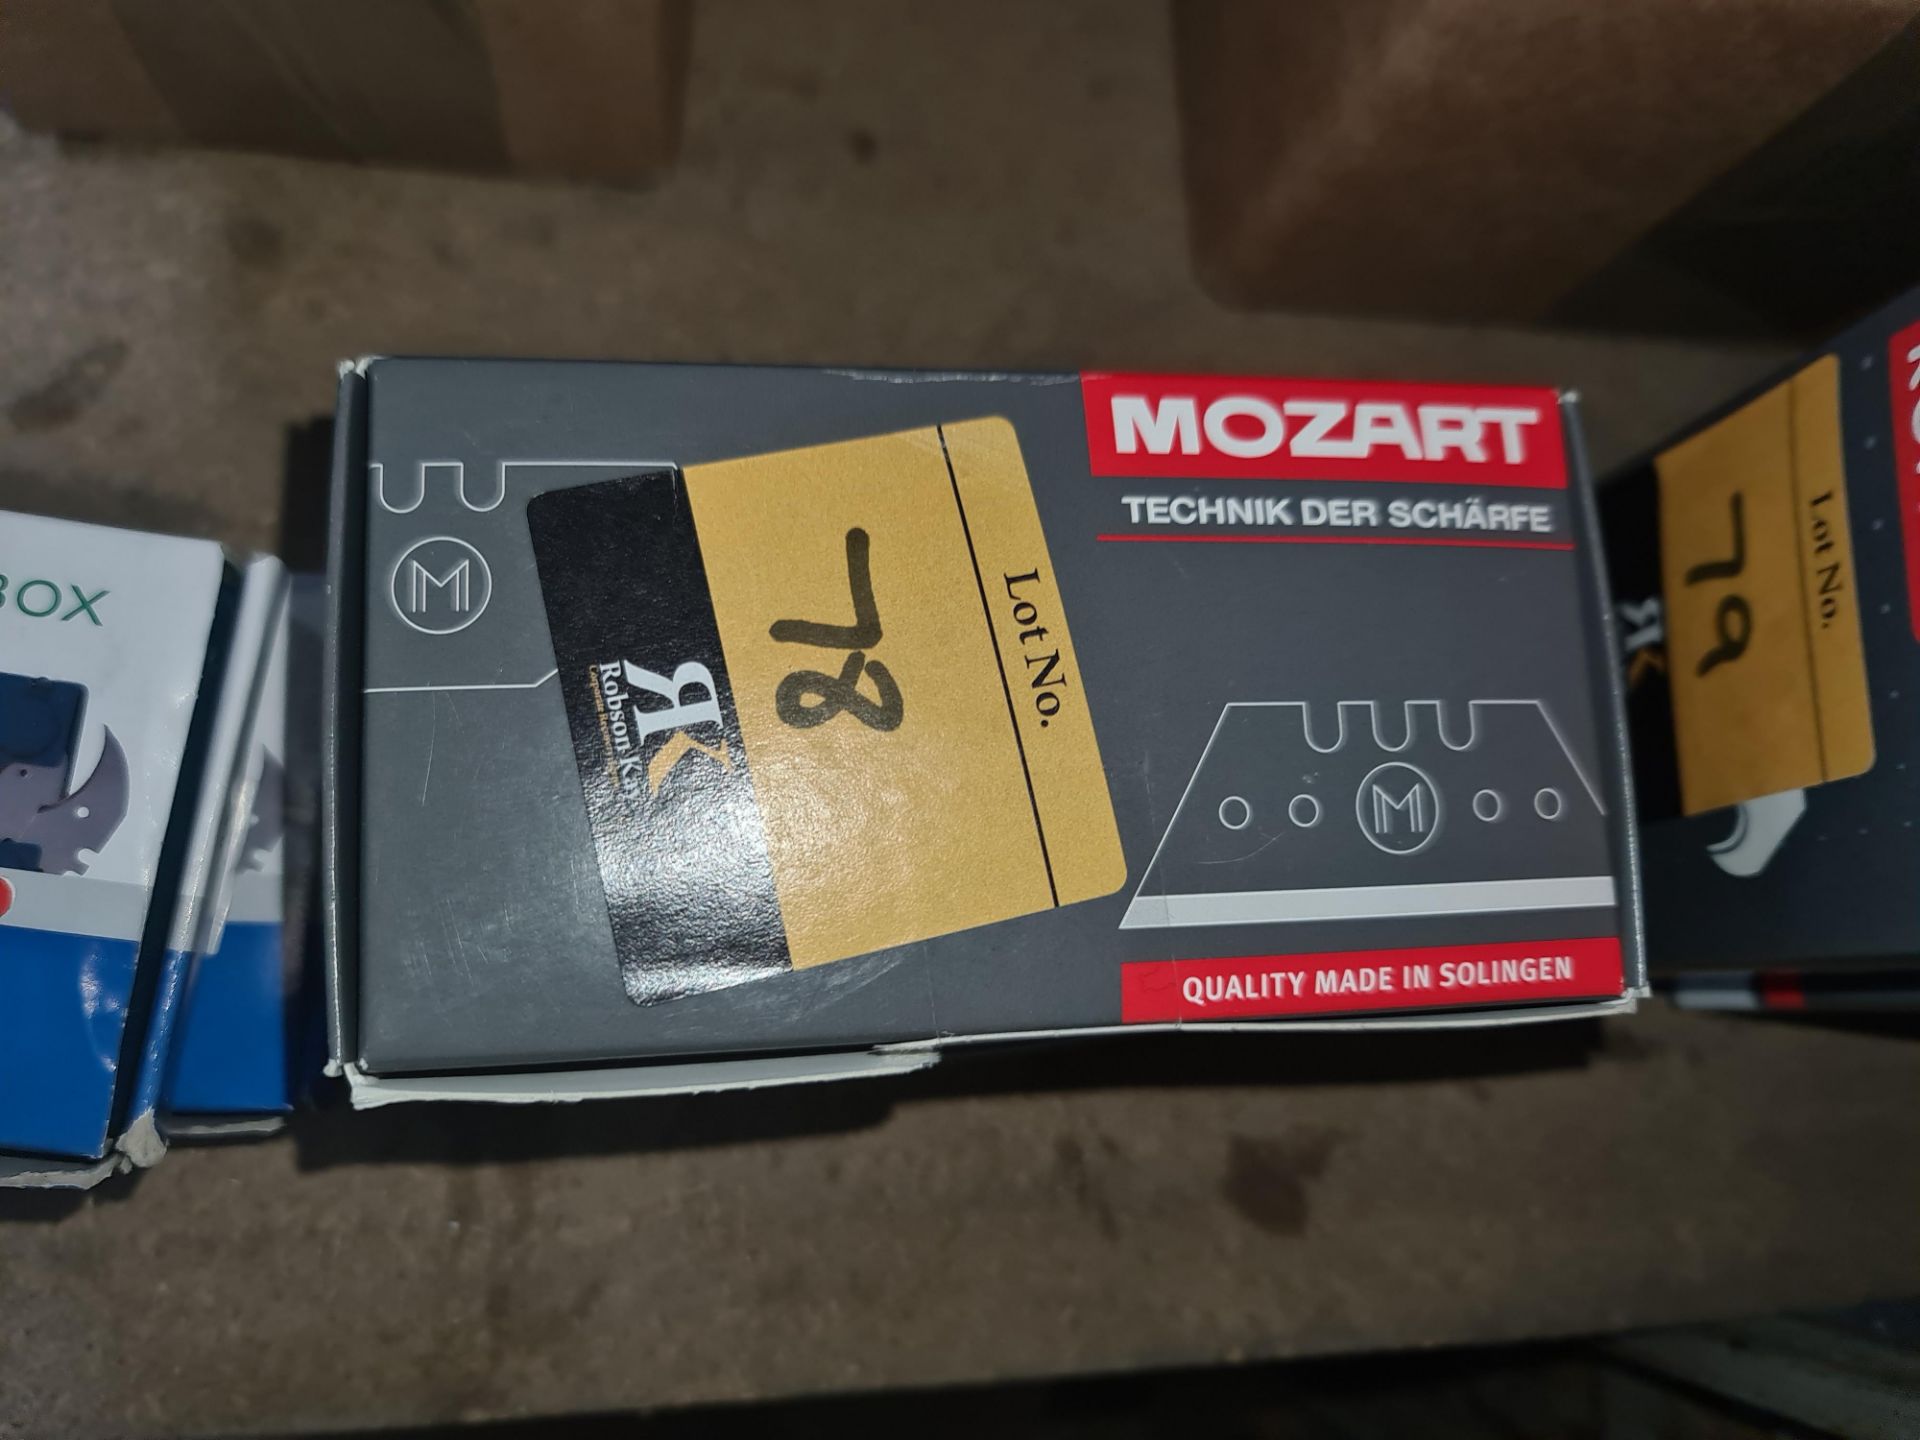 3 boxes of Mozart trimming knife bladesLots 31 - 328 comprise the total assets of a flooring tool